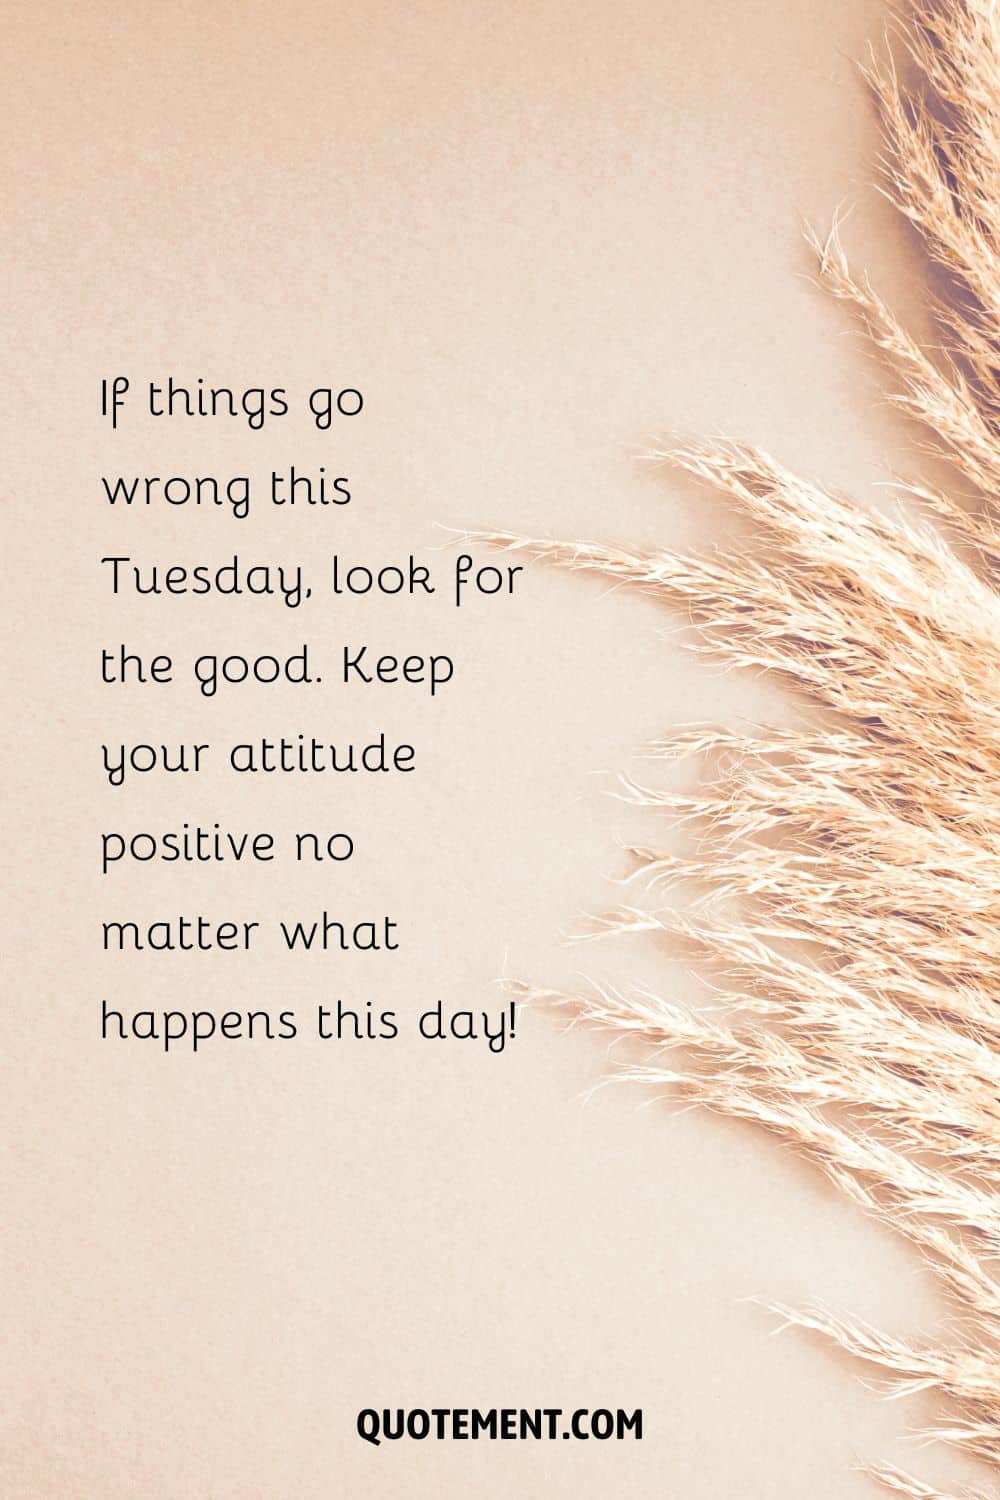 “If things go wrong this Tuesday, look for the good. Keep your attitude positive no matter what happens this day!” — Unknown